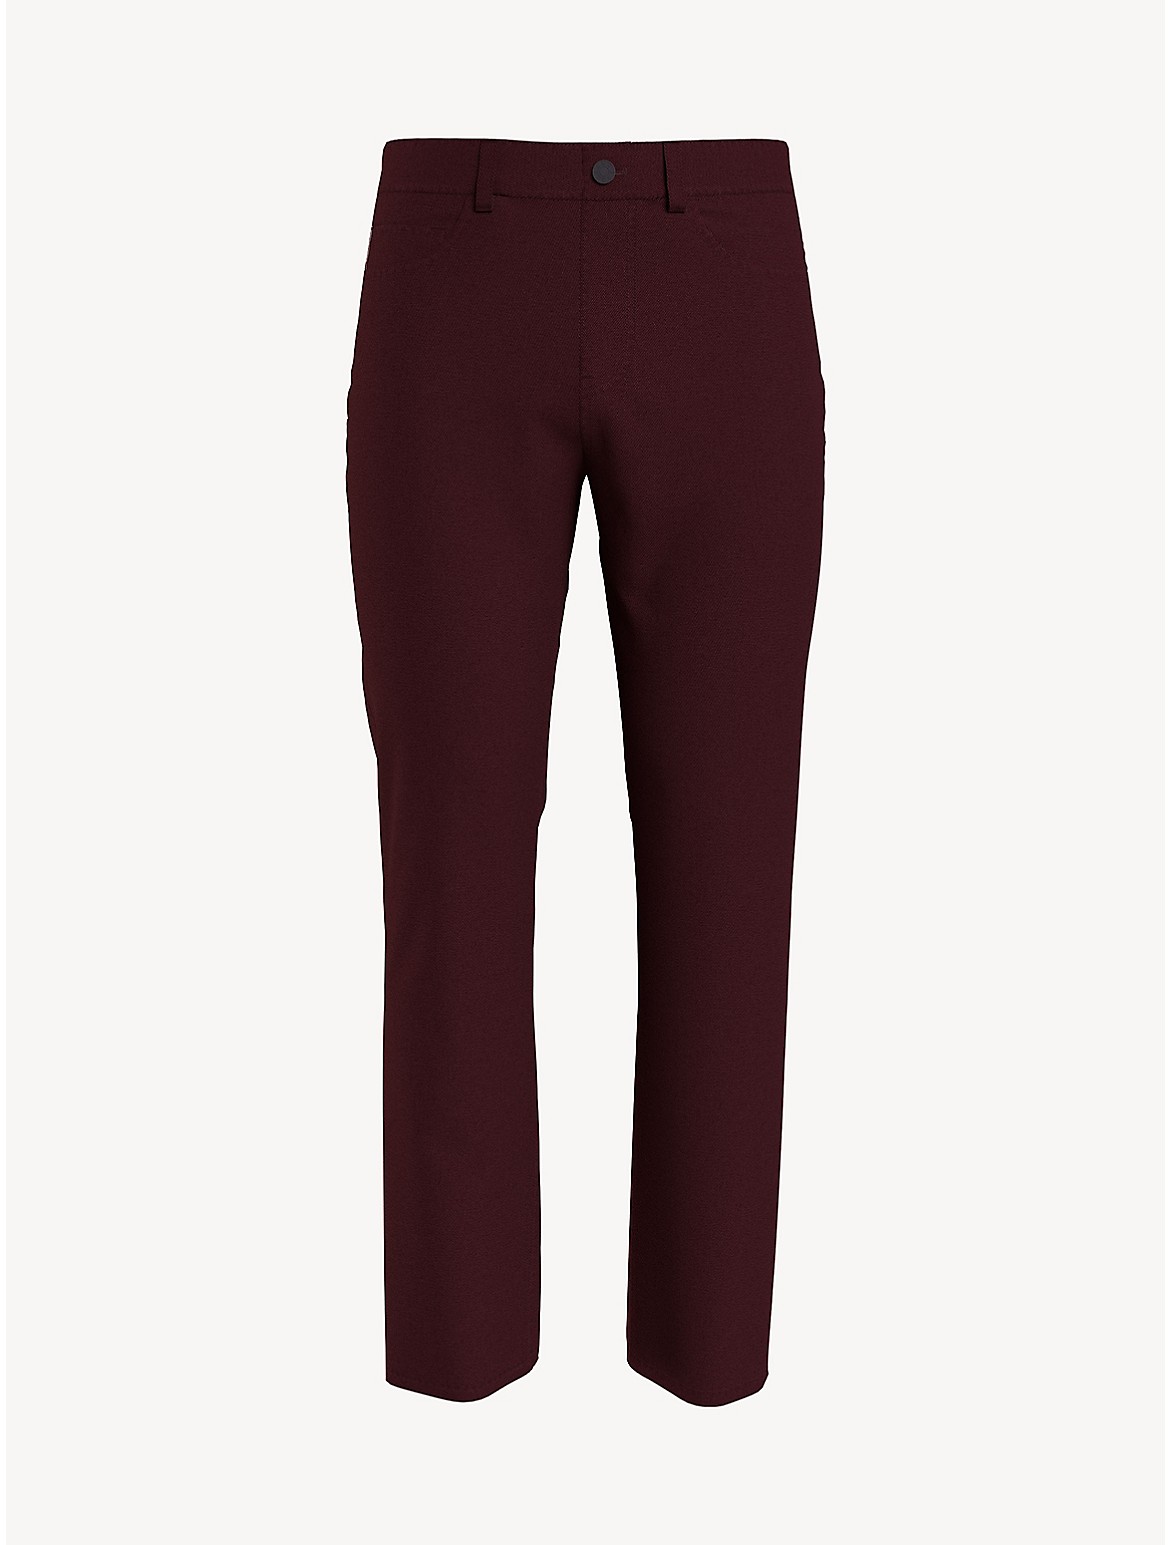 Tommy Hilfiger Men's Straight Fit Twill Pant